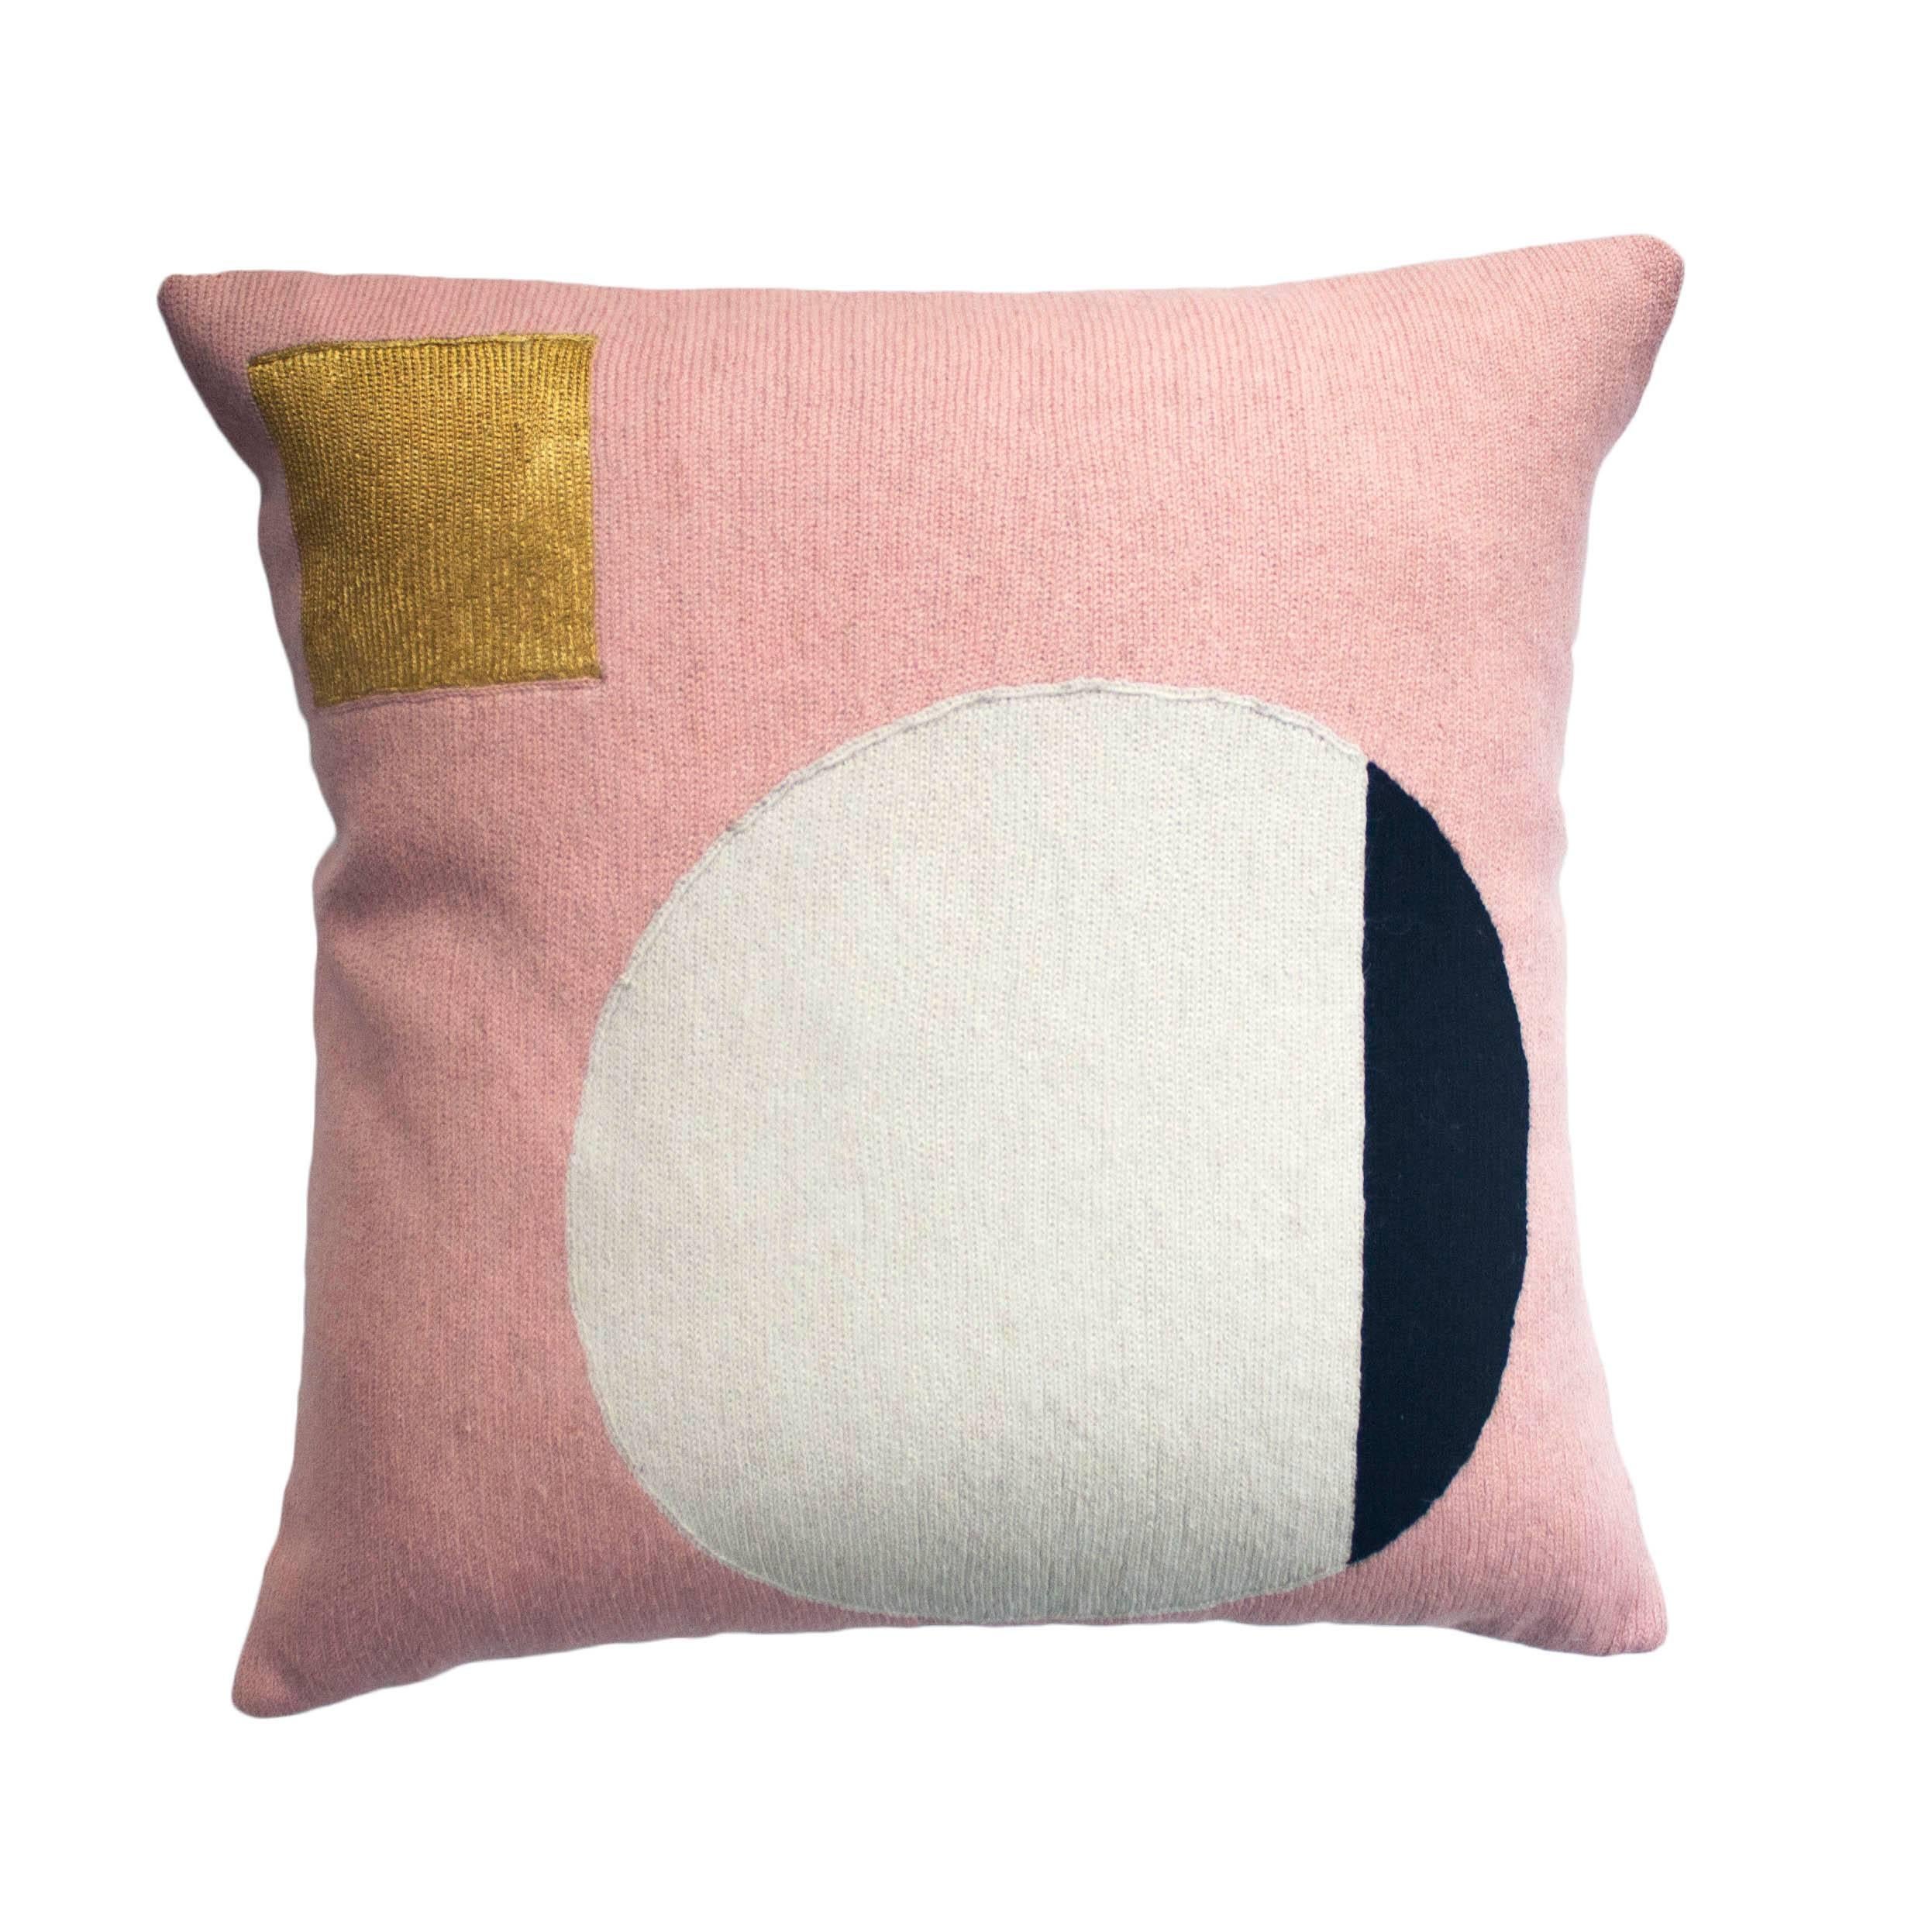 Modern Daphne Circle/Gold Hand Embroidered Geometric Wool Throw Pillow Cover